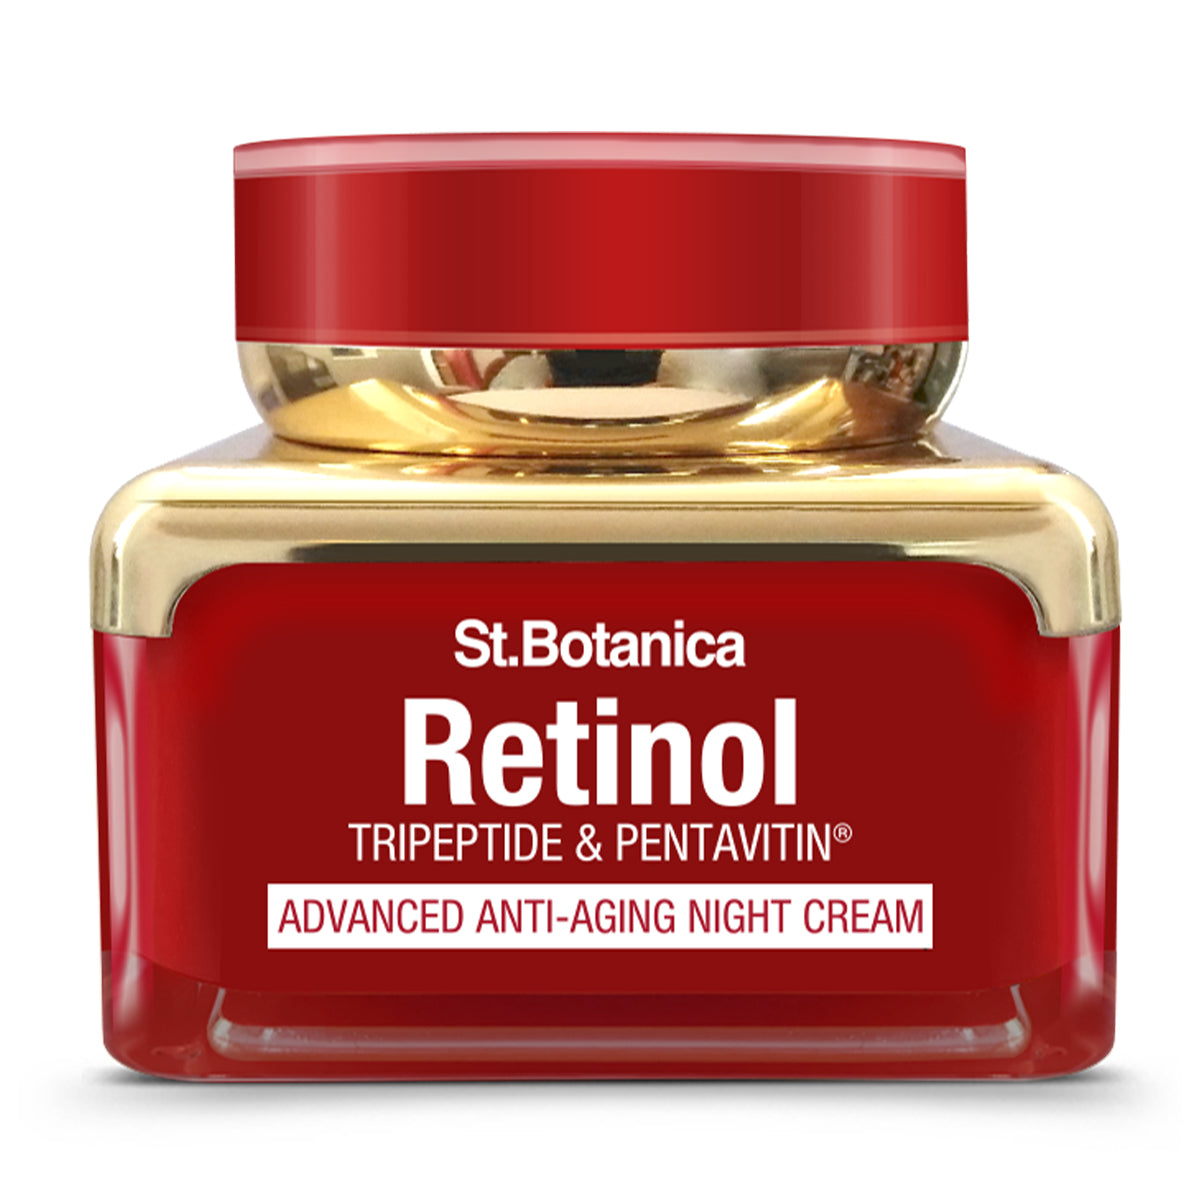 St.Botanica Retinol Advanced Anti Aging Night Cream - With Retinol, Vitamin C & Botanical Extracts - Wakeup To Intensly Moisturized Younger Looking Skin, 50 g (STBOT590)